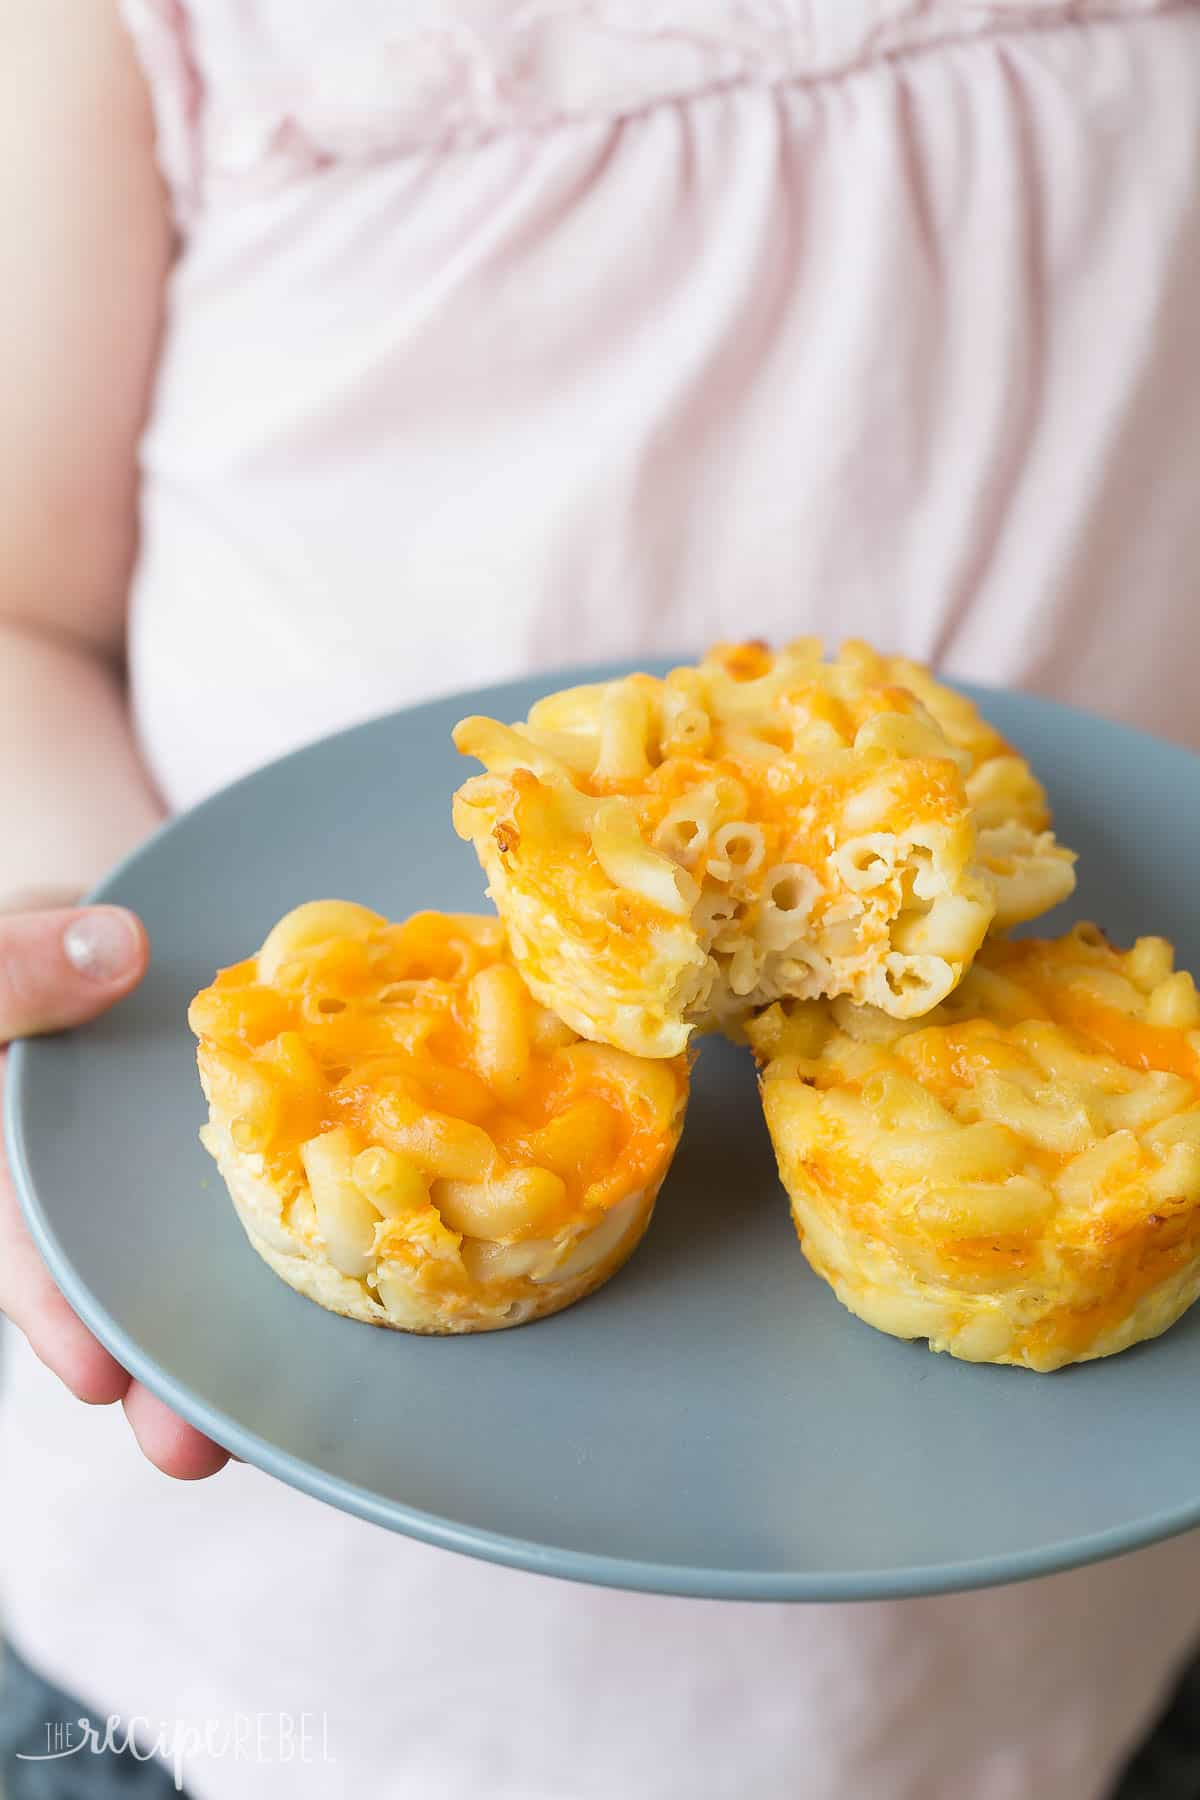 Baked Macaroni And Cheese Food Network
 Baked Mac and Cheese Cups VIDEO gluten free